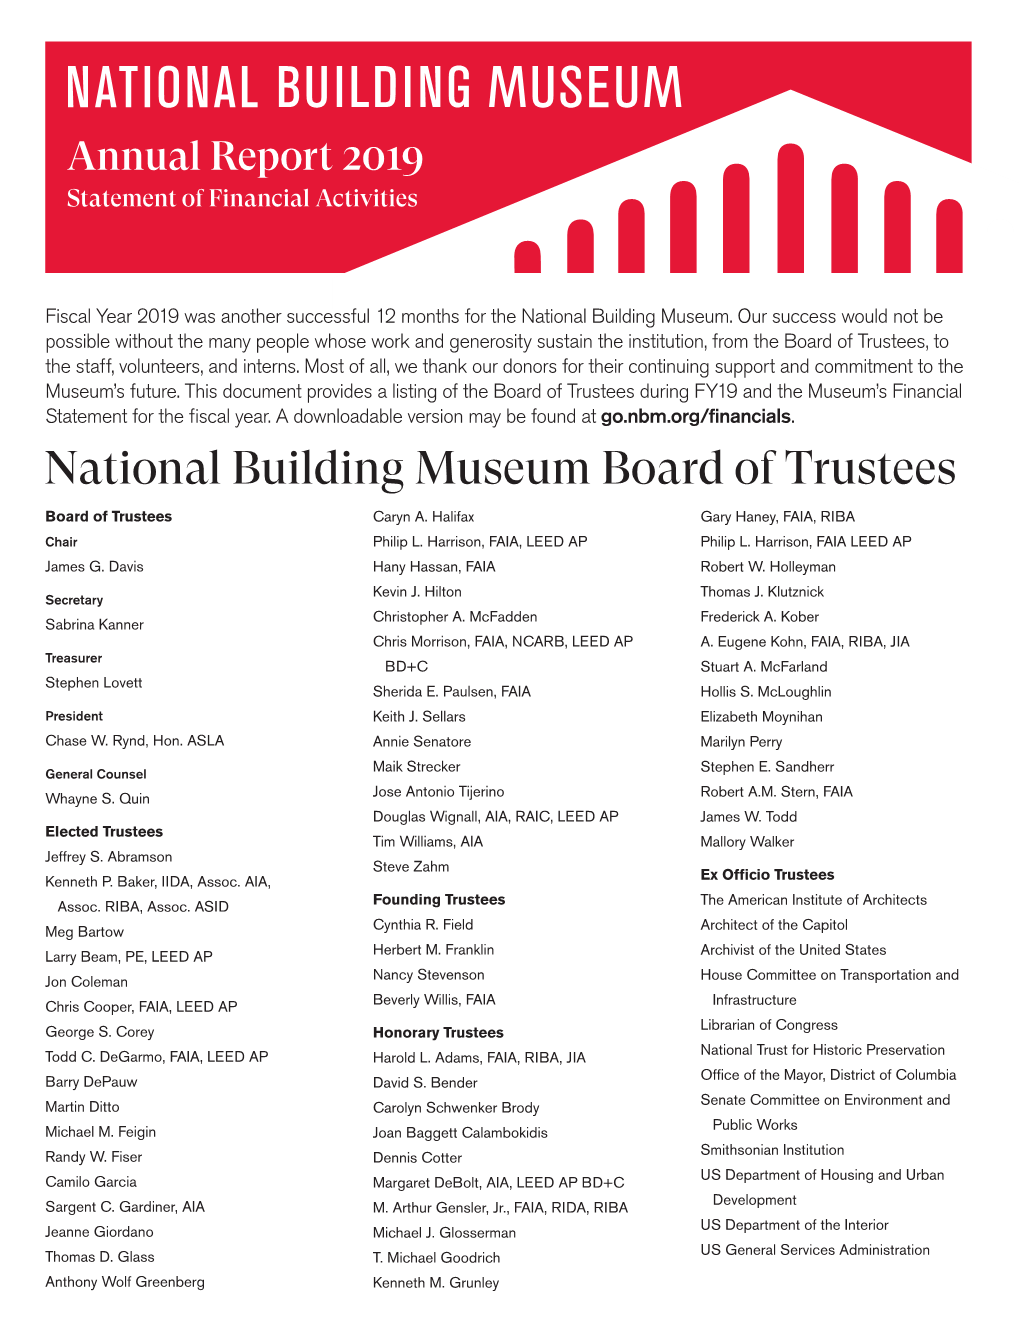 National Building Museum Board of Trustees